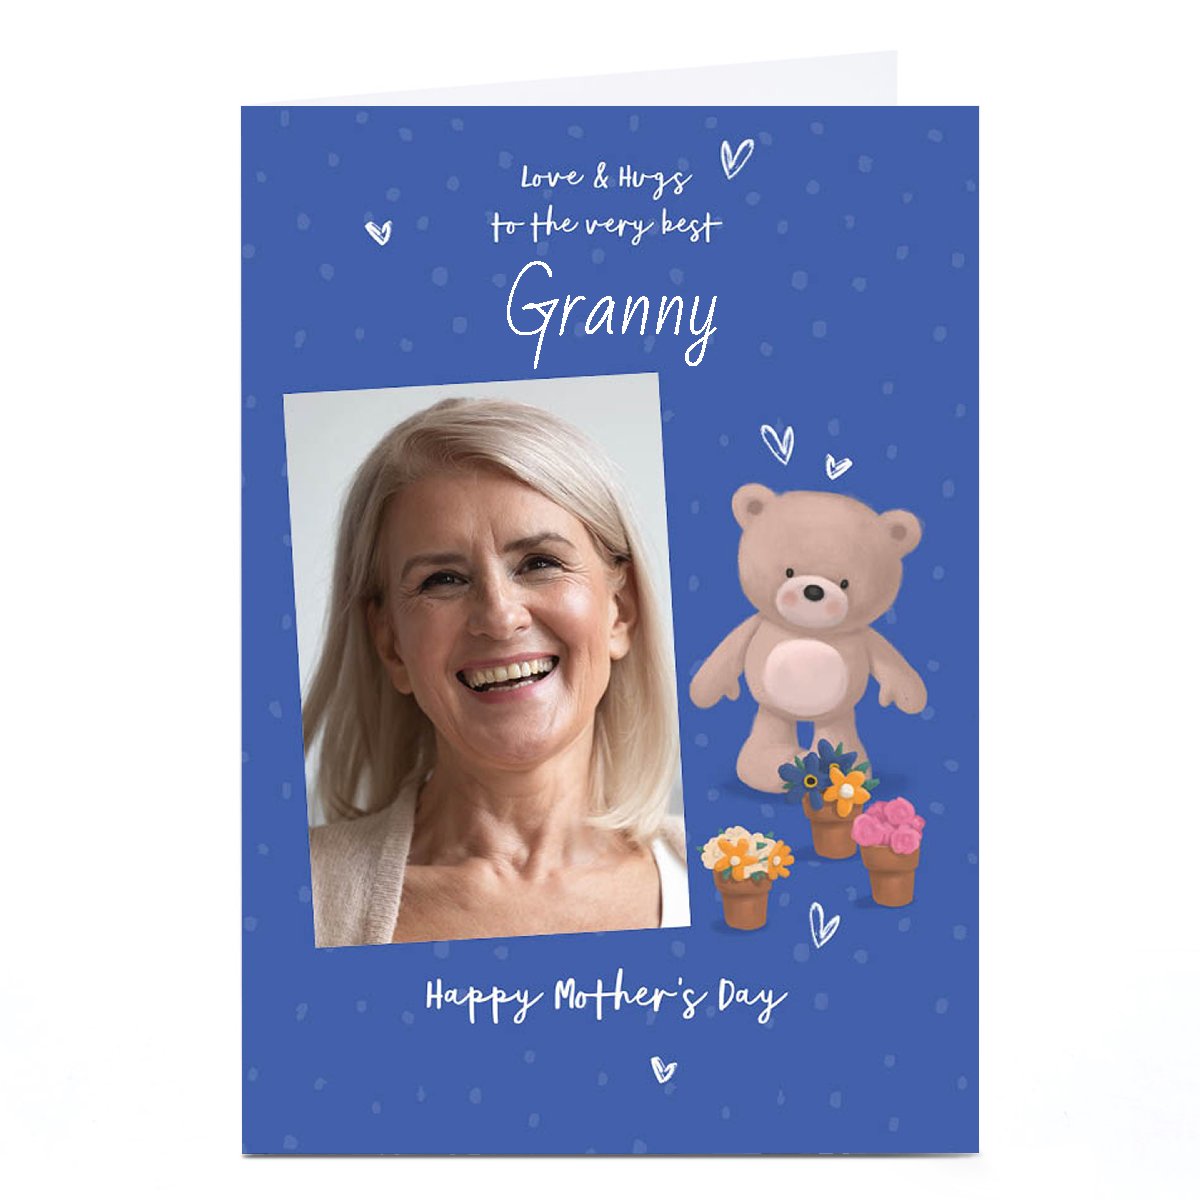 Personalised Mother's Day Card - Hugs Bear with flowers - Granny